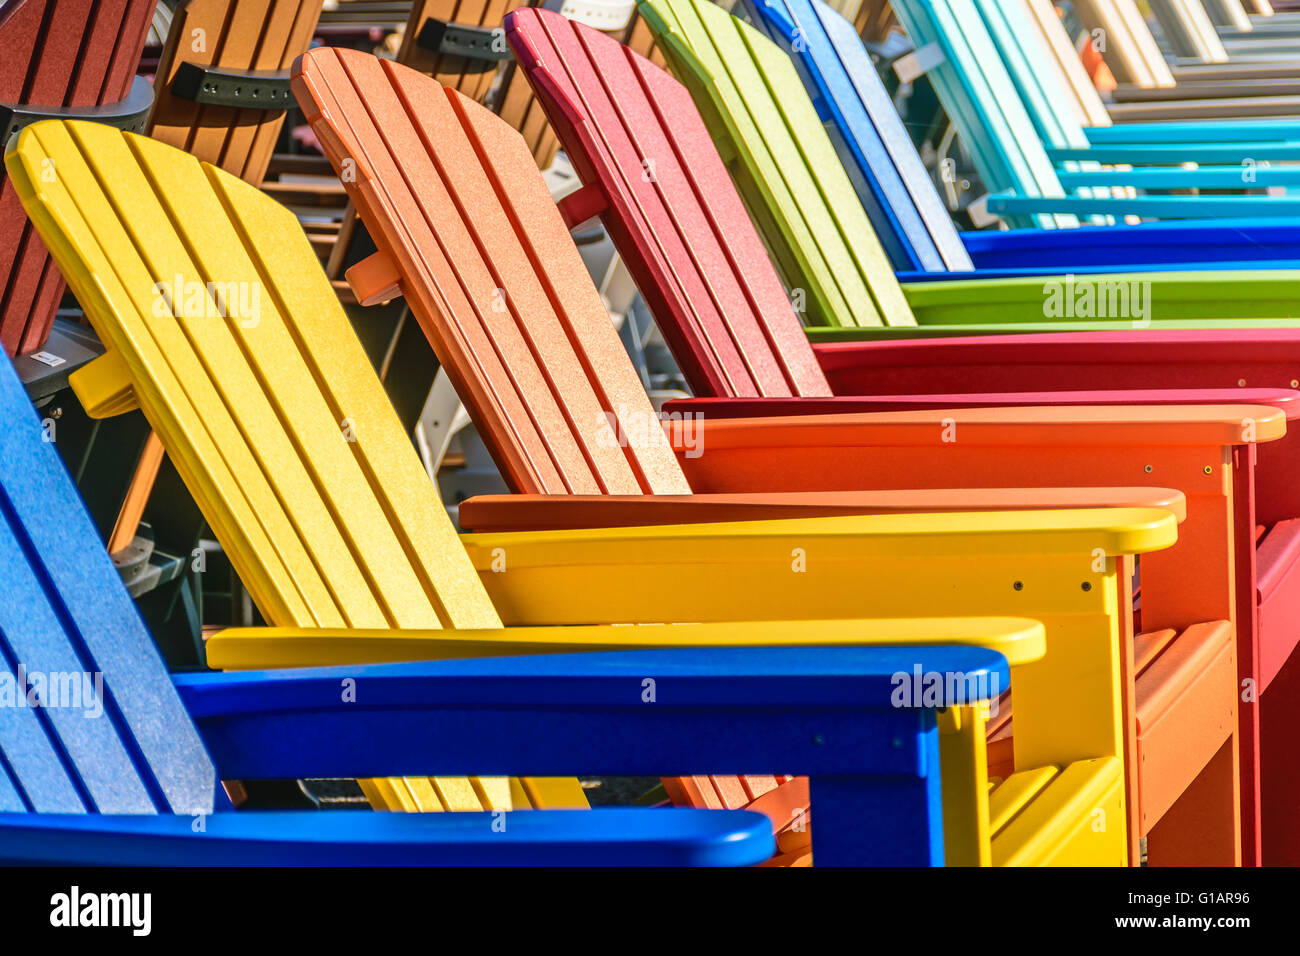 A row of colorful Adirondack chairs Stock Photo